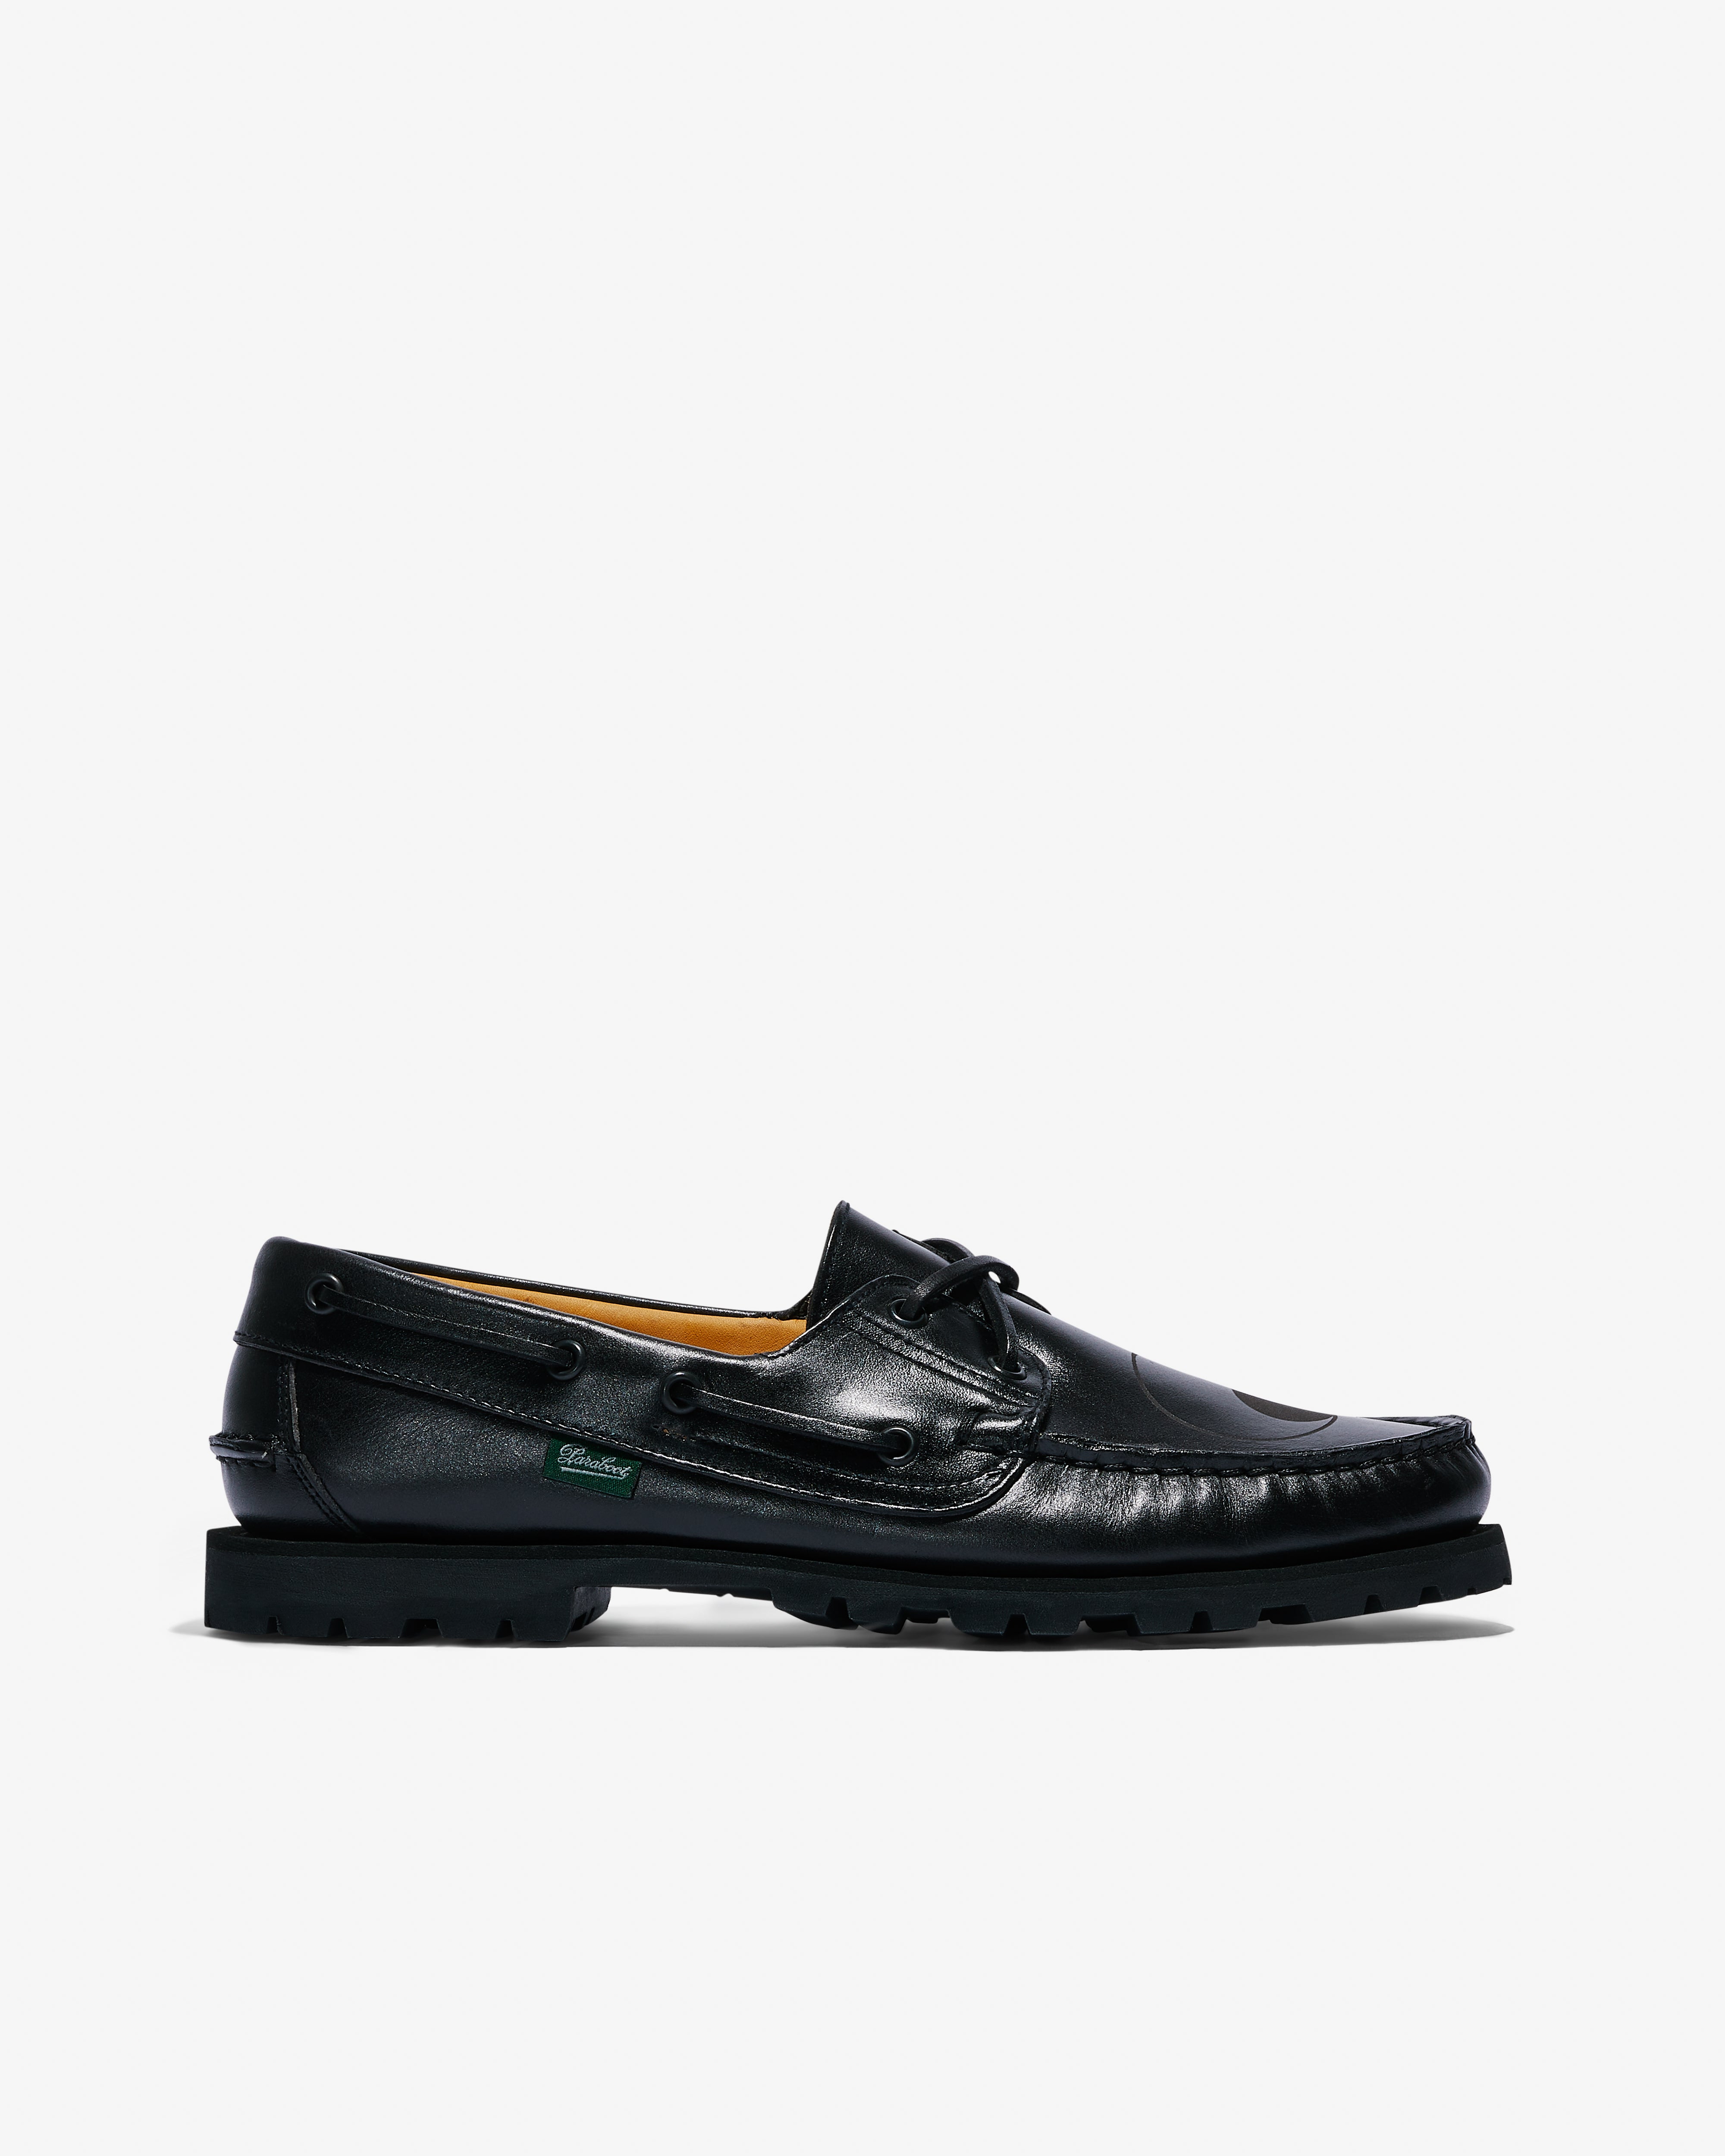 Our Legacy - Paraboot Malo Boat Shoe - (Black)